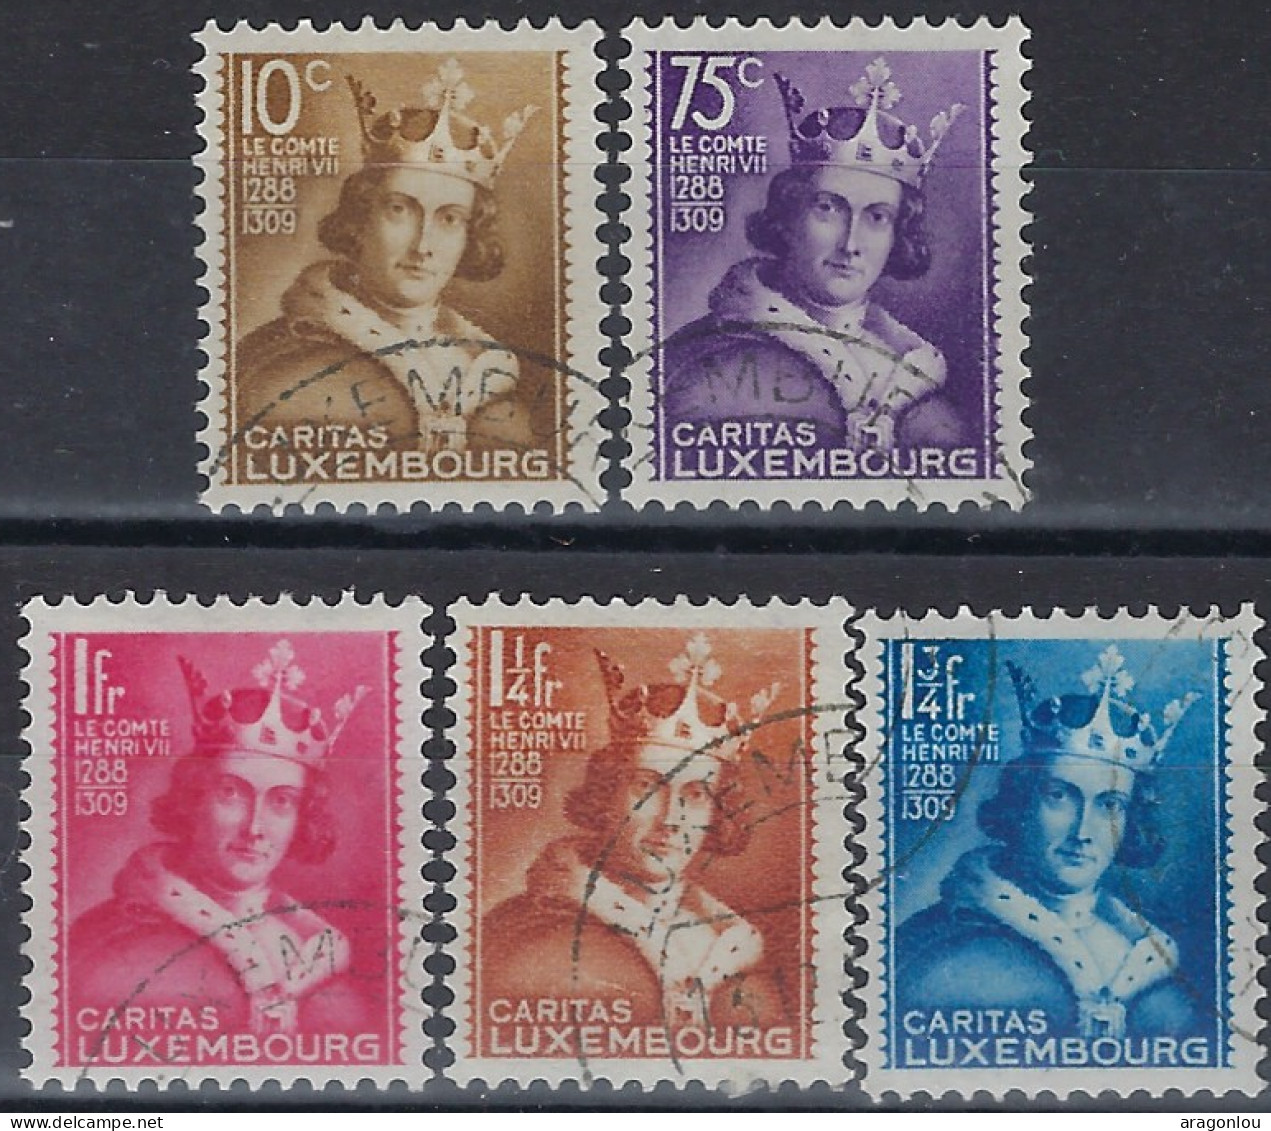 Luxembourg - Luxemburrg - Timbres  1933    Henri IV      Série   ° - Usati